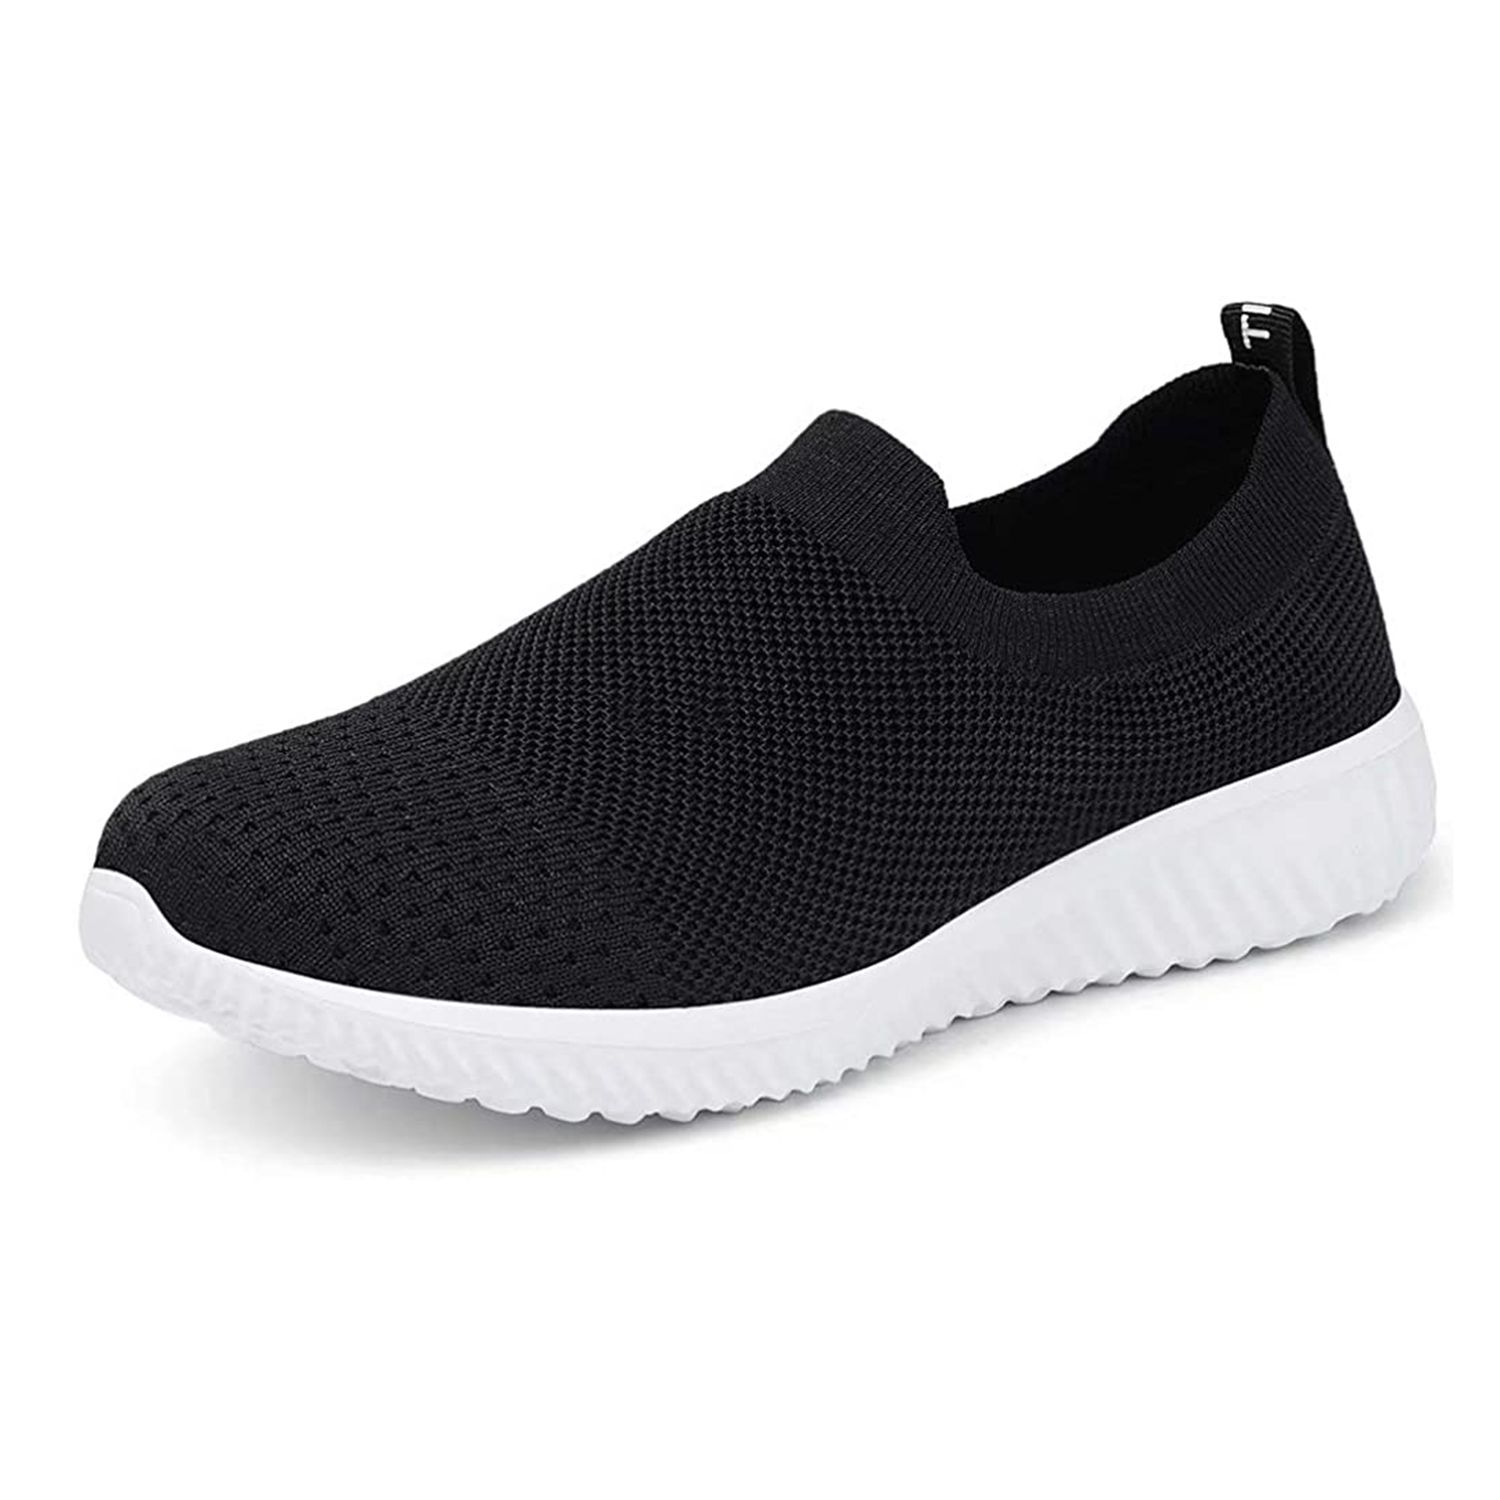 People with Arthritis Love the Lancrop Slip-On Walking Shoes | PEOPLE.com